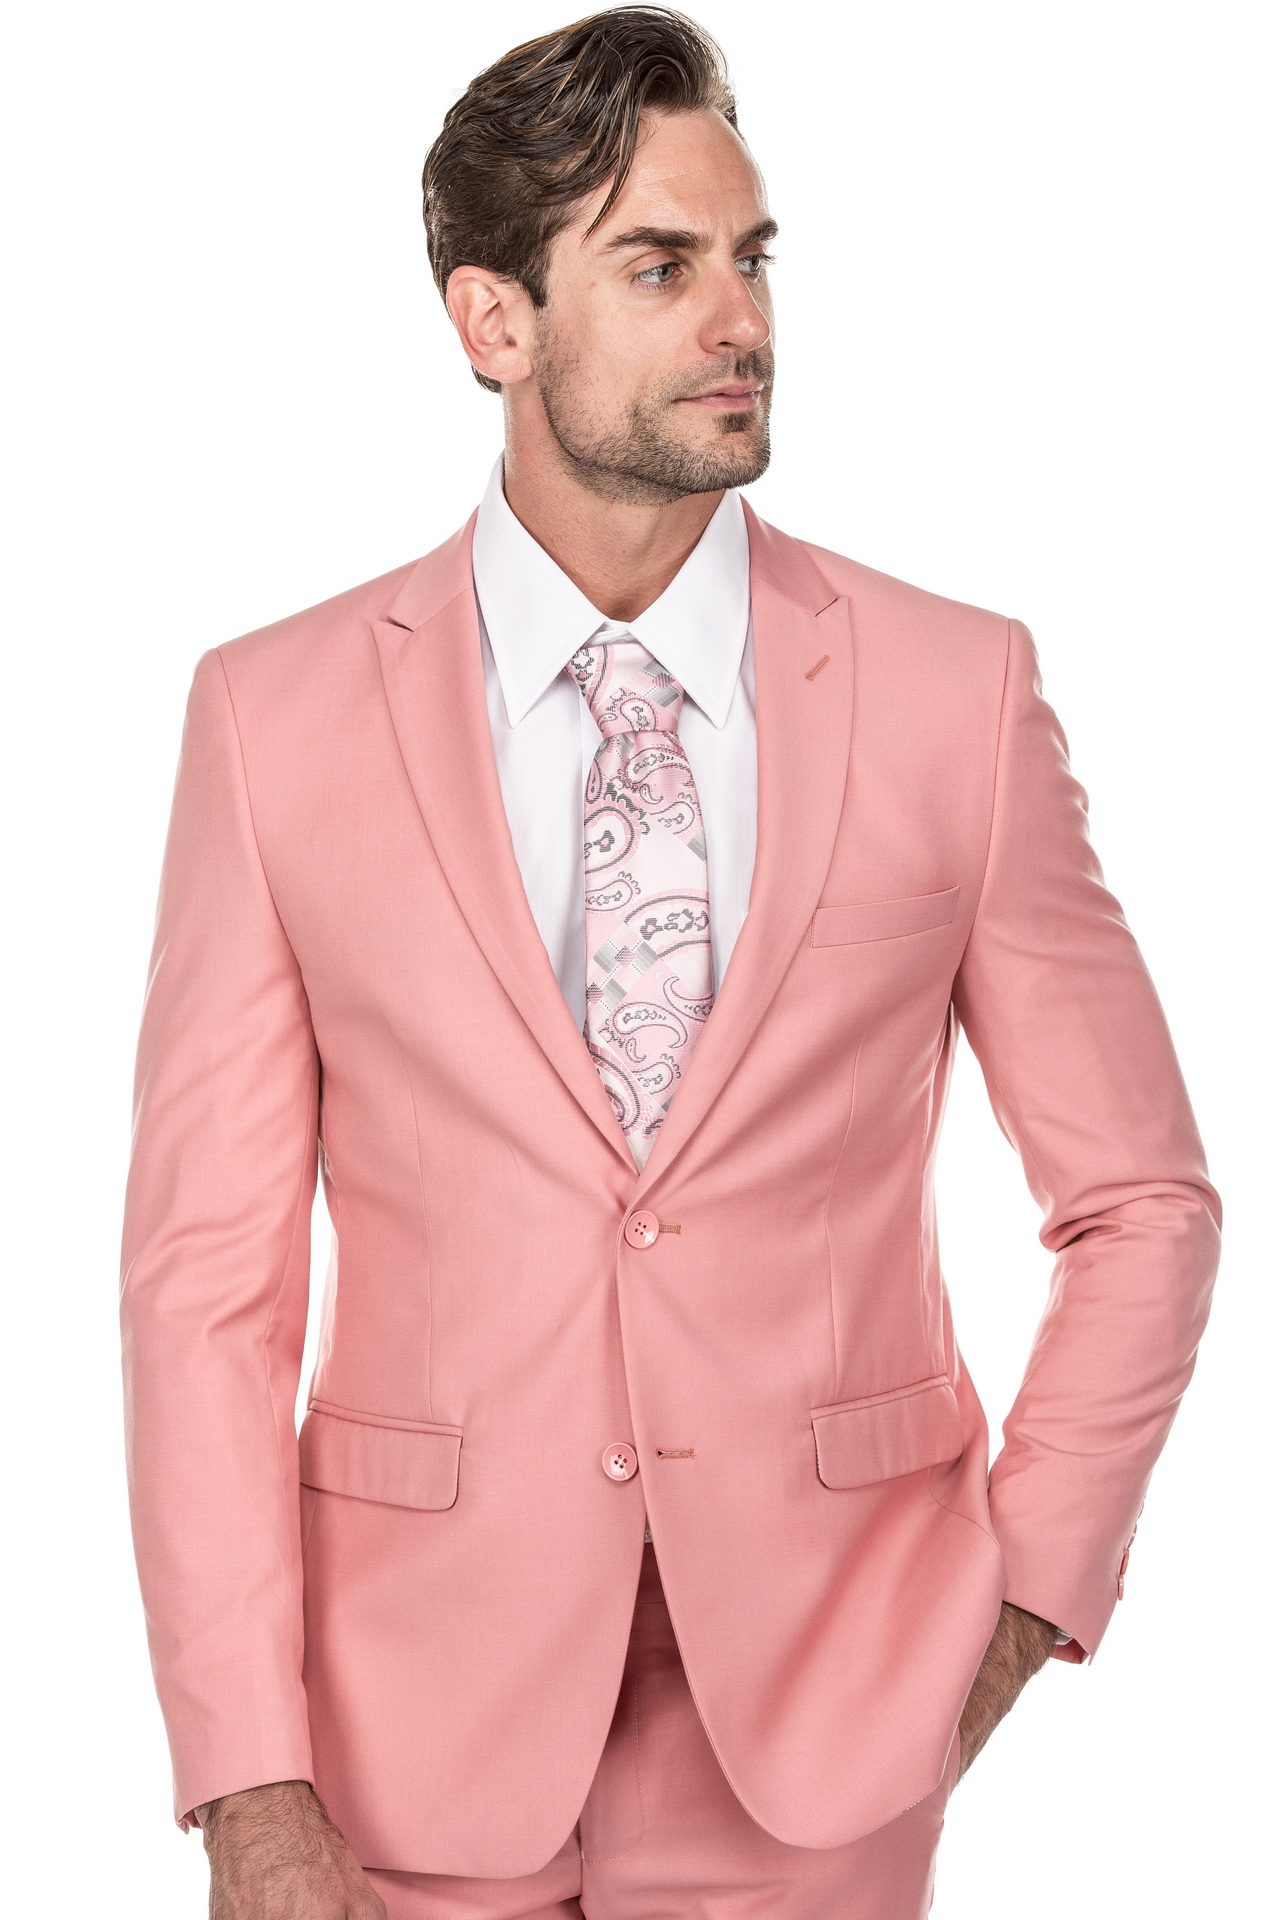 Bright Pink Men Suits Wear Wedding Blazer Tuxedos Plus Size Clothes for  Groom | eBay